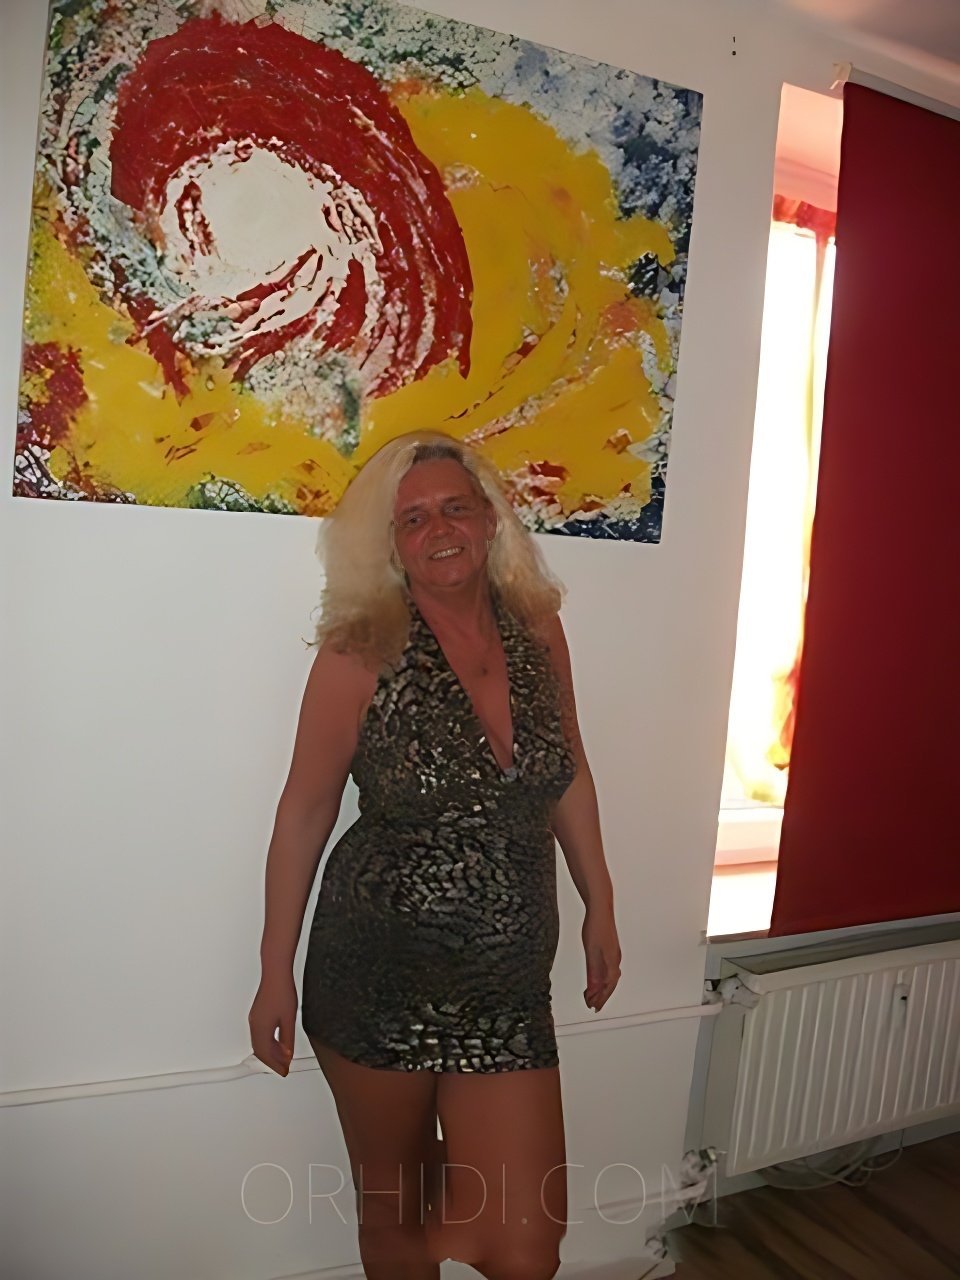 Meet Amazing Nicky (42) - Blondes Gift: Top Escort Girl - model preview photo 1 